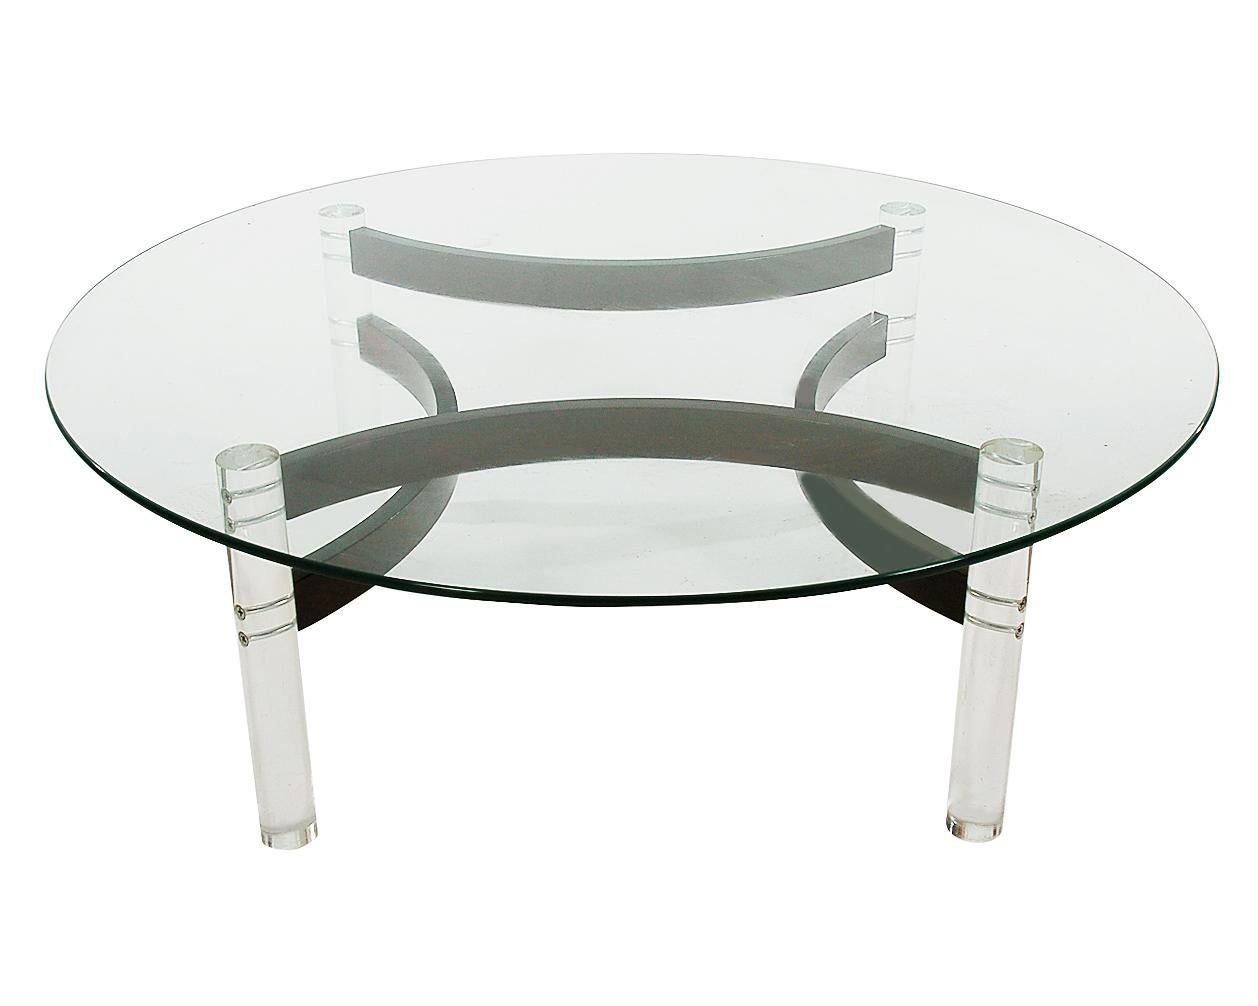 American Midcentury Danish Modern Lucite, Bentwood and Glass Circular Cocktail Table For Sale